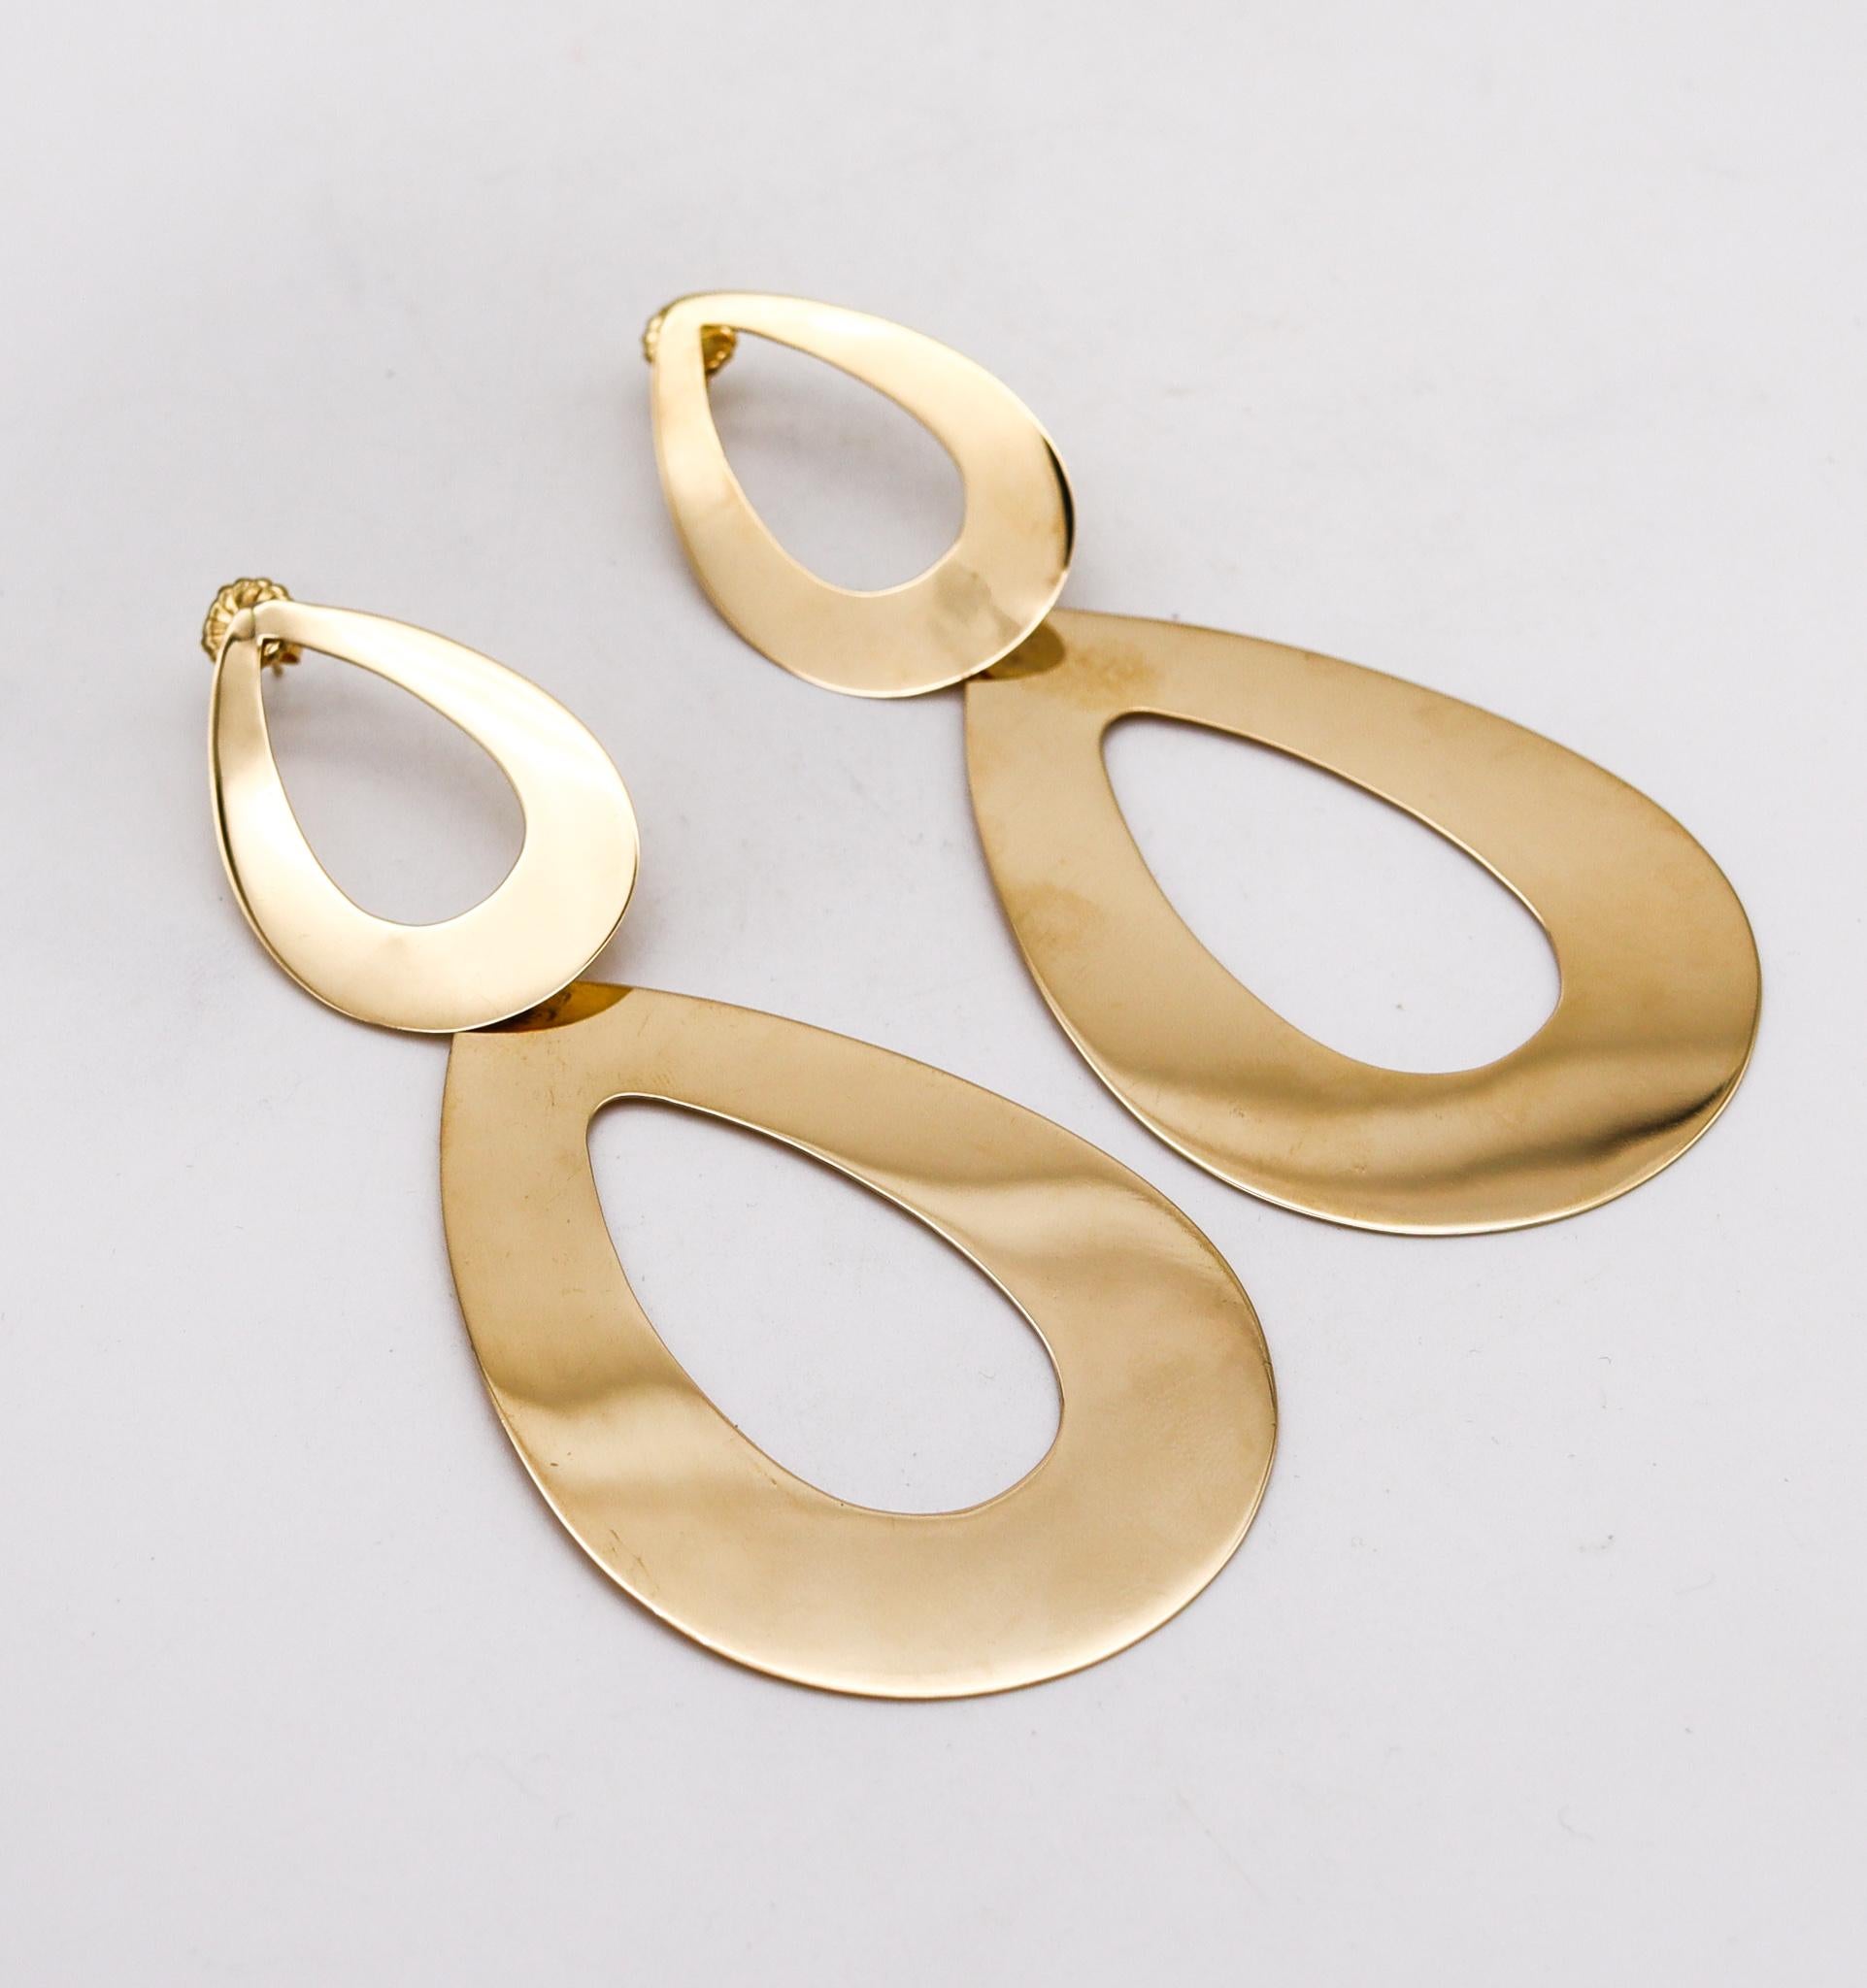 Geometric dangle drop earrings.

Beautiful oversized statements pieces, created in Italy in solid yellow gold of 18 karats with very high polished finish. Fitted with a pair of posts for pierced ears and butterfly backs.

Weight: 22.95 Grams, (14.71